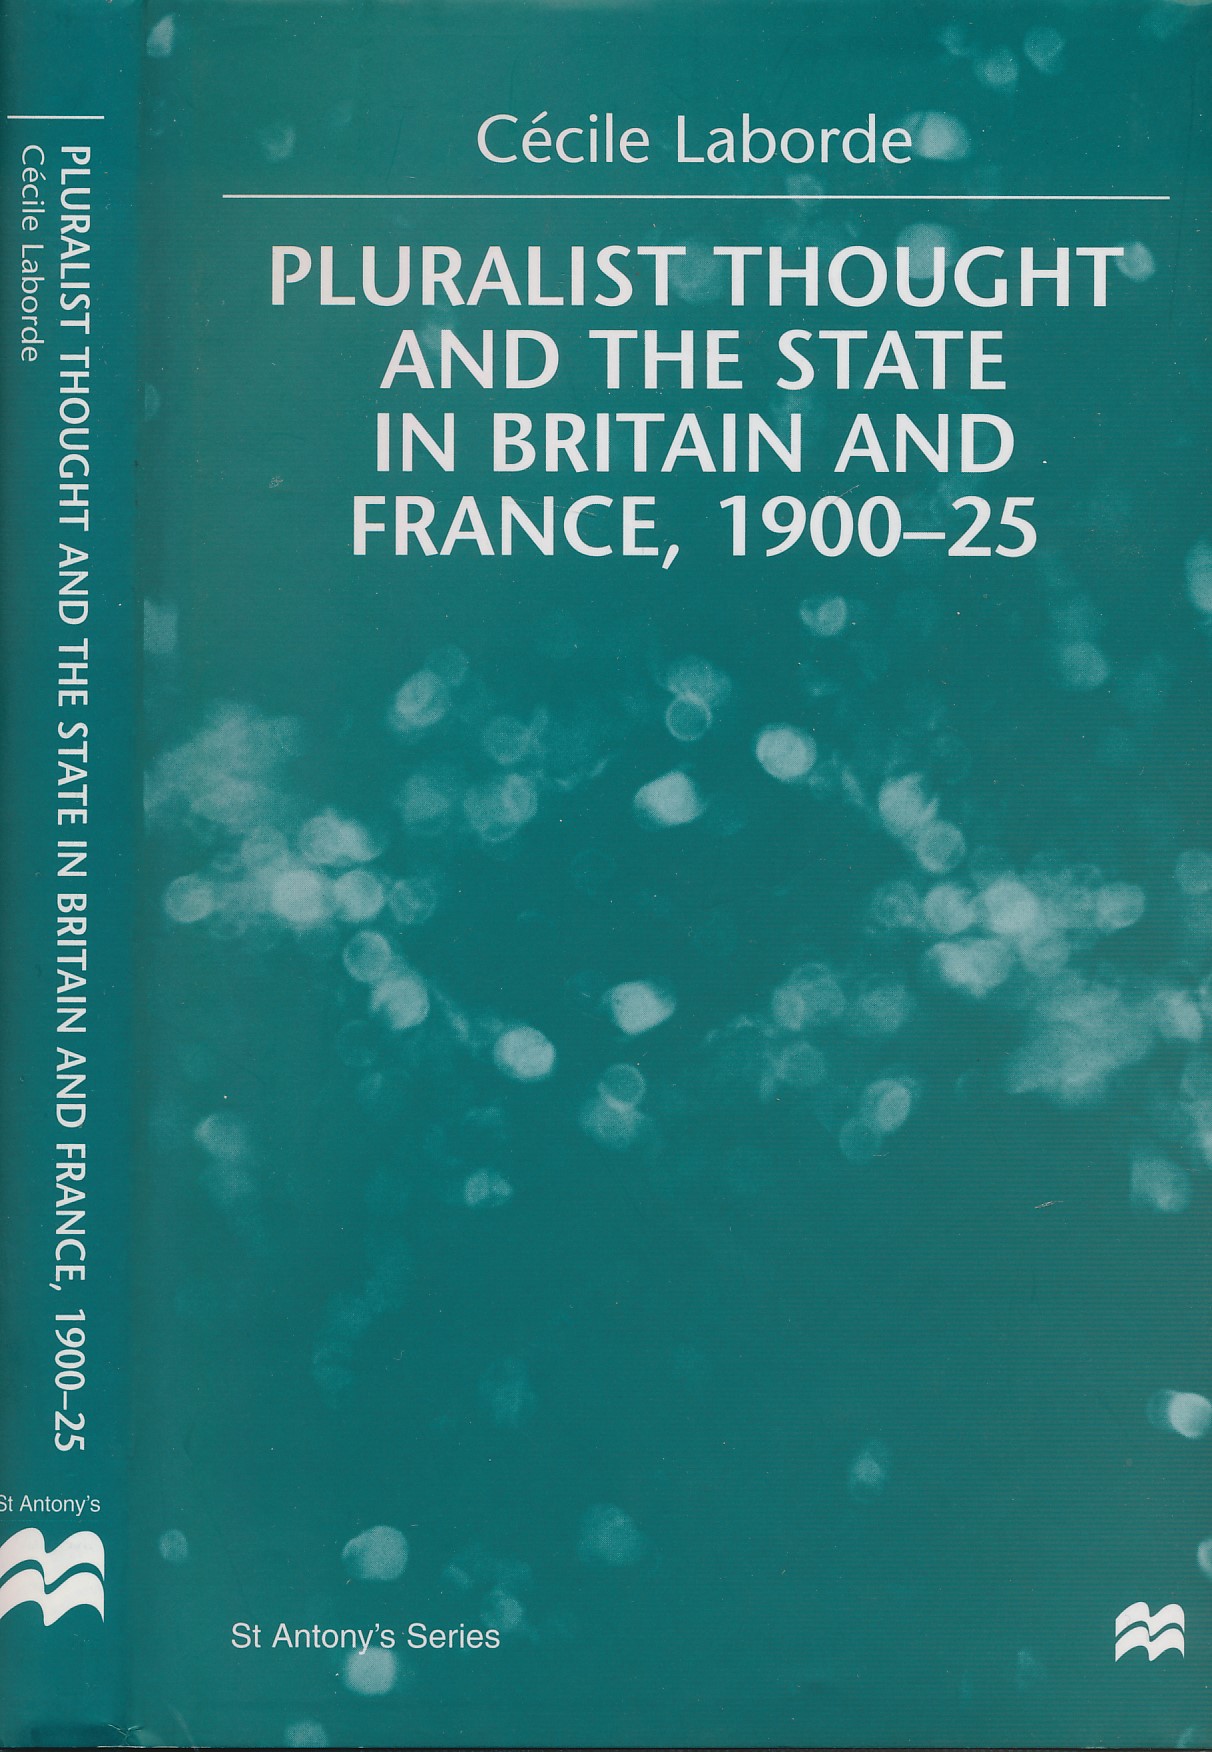 Pluralist Thought and the State in Britain and France, 1900-25. Signed copy.